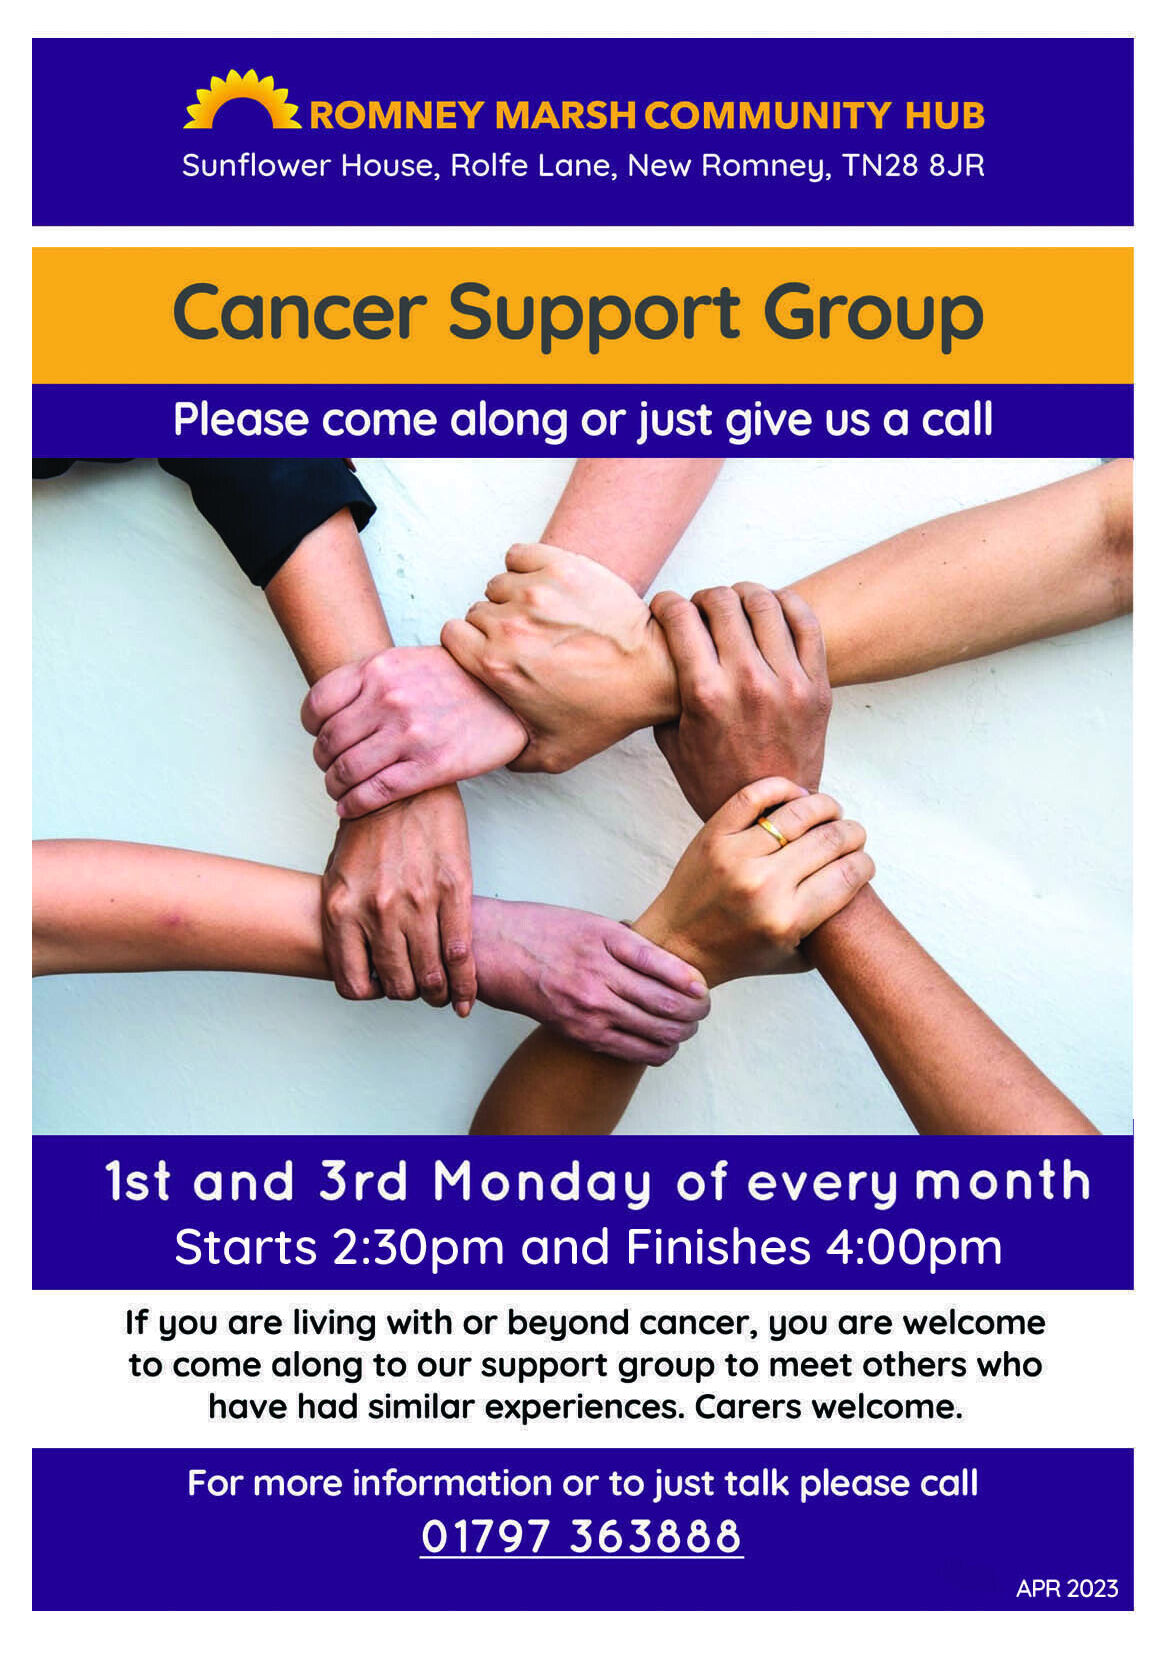 CANCER SUPPORT GROUP A4 POSTER APR 2023